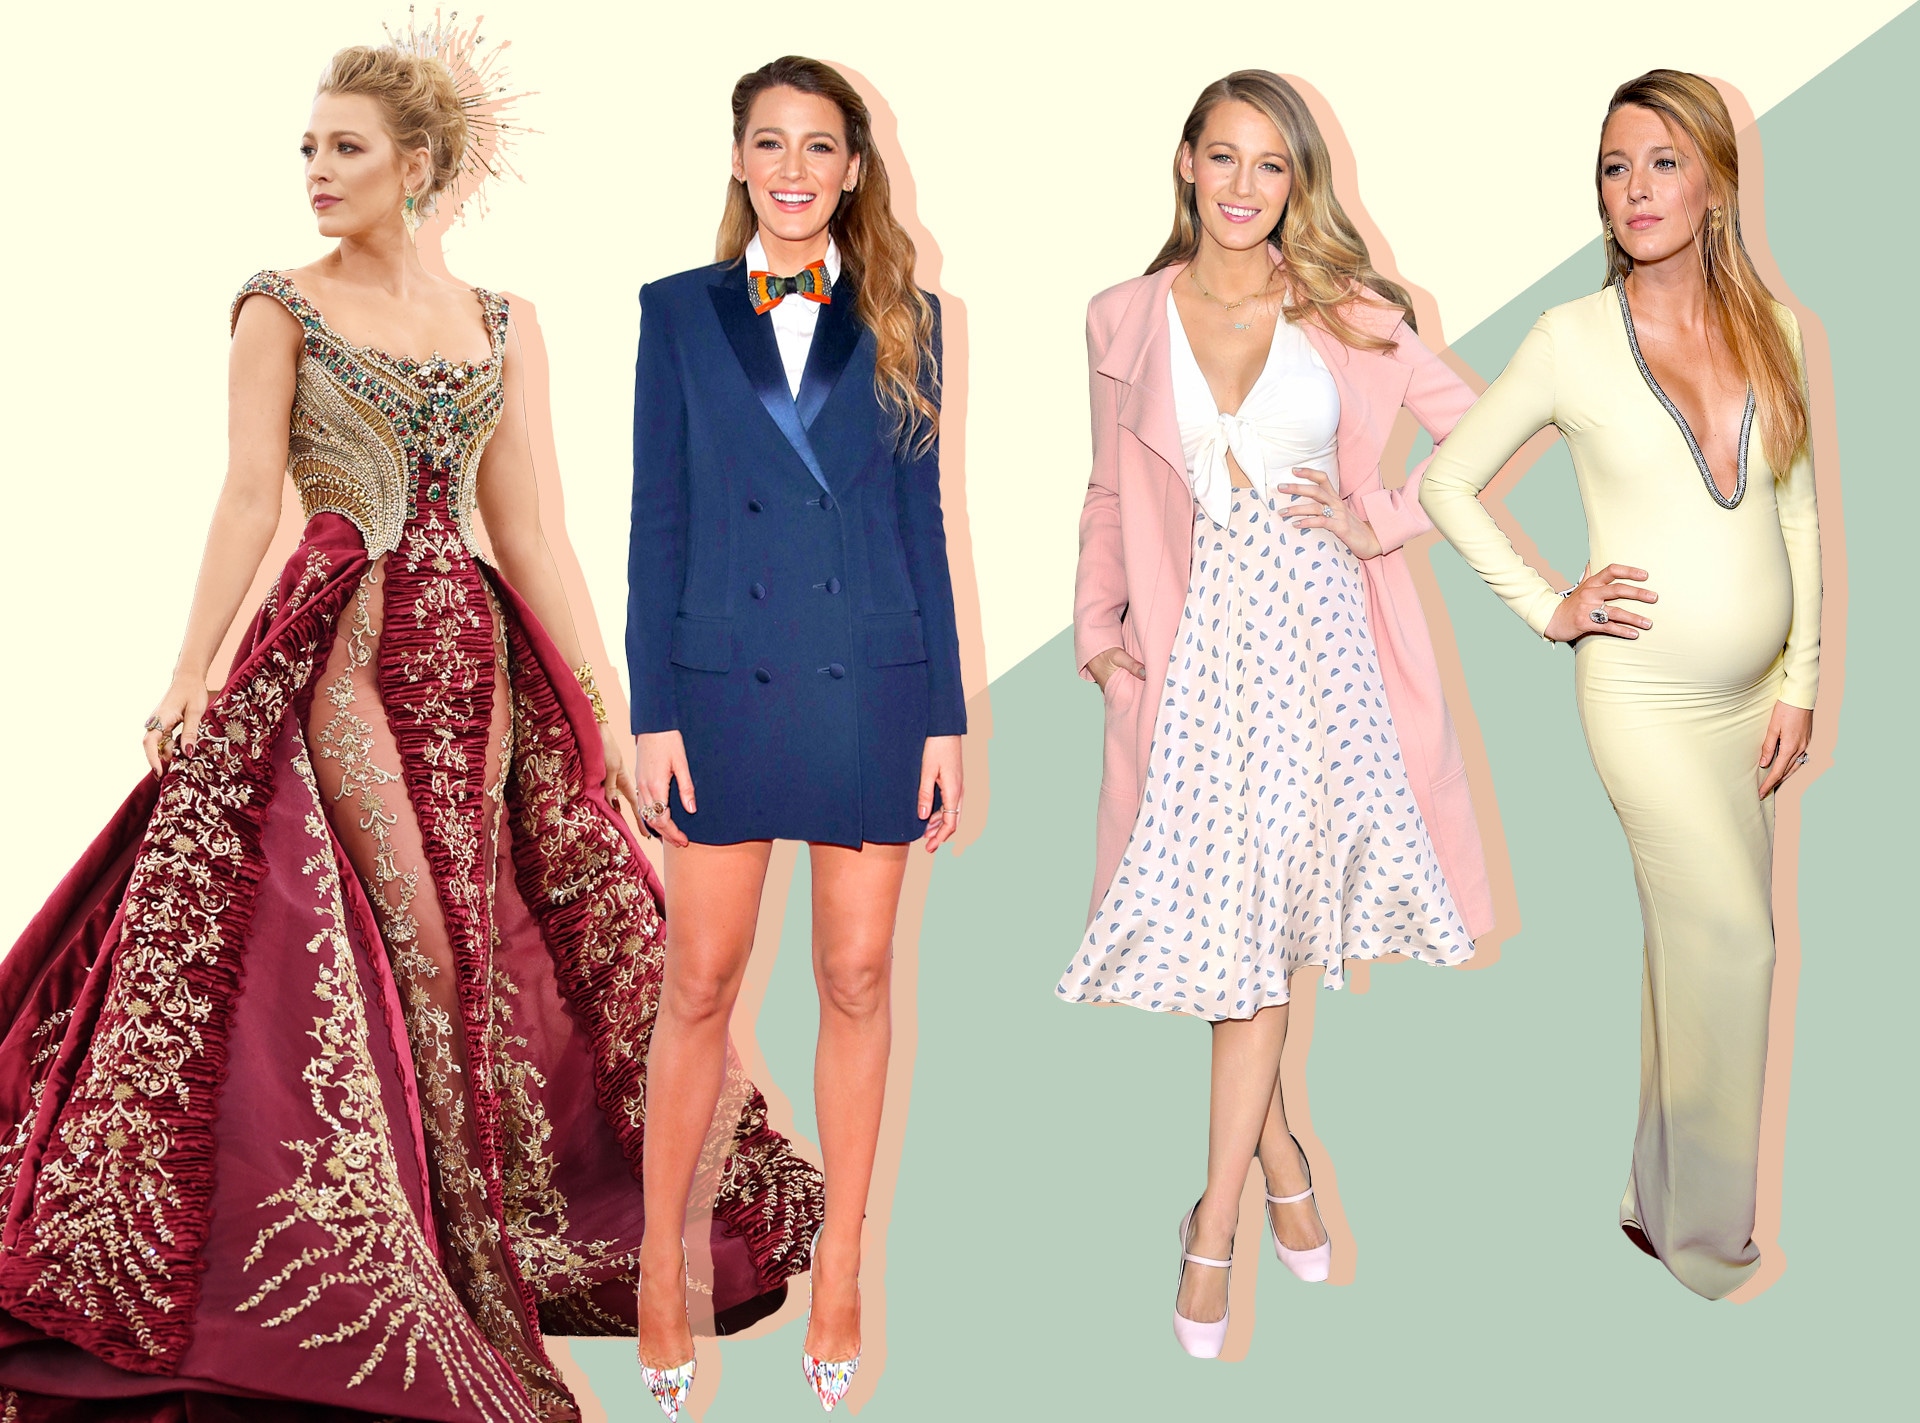 Blake Lively Style, Poll